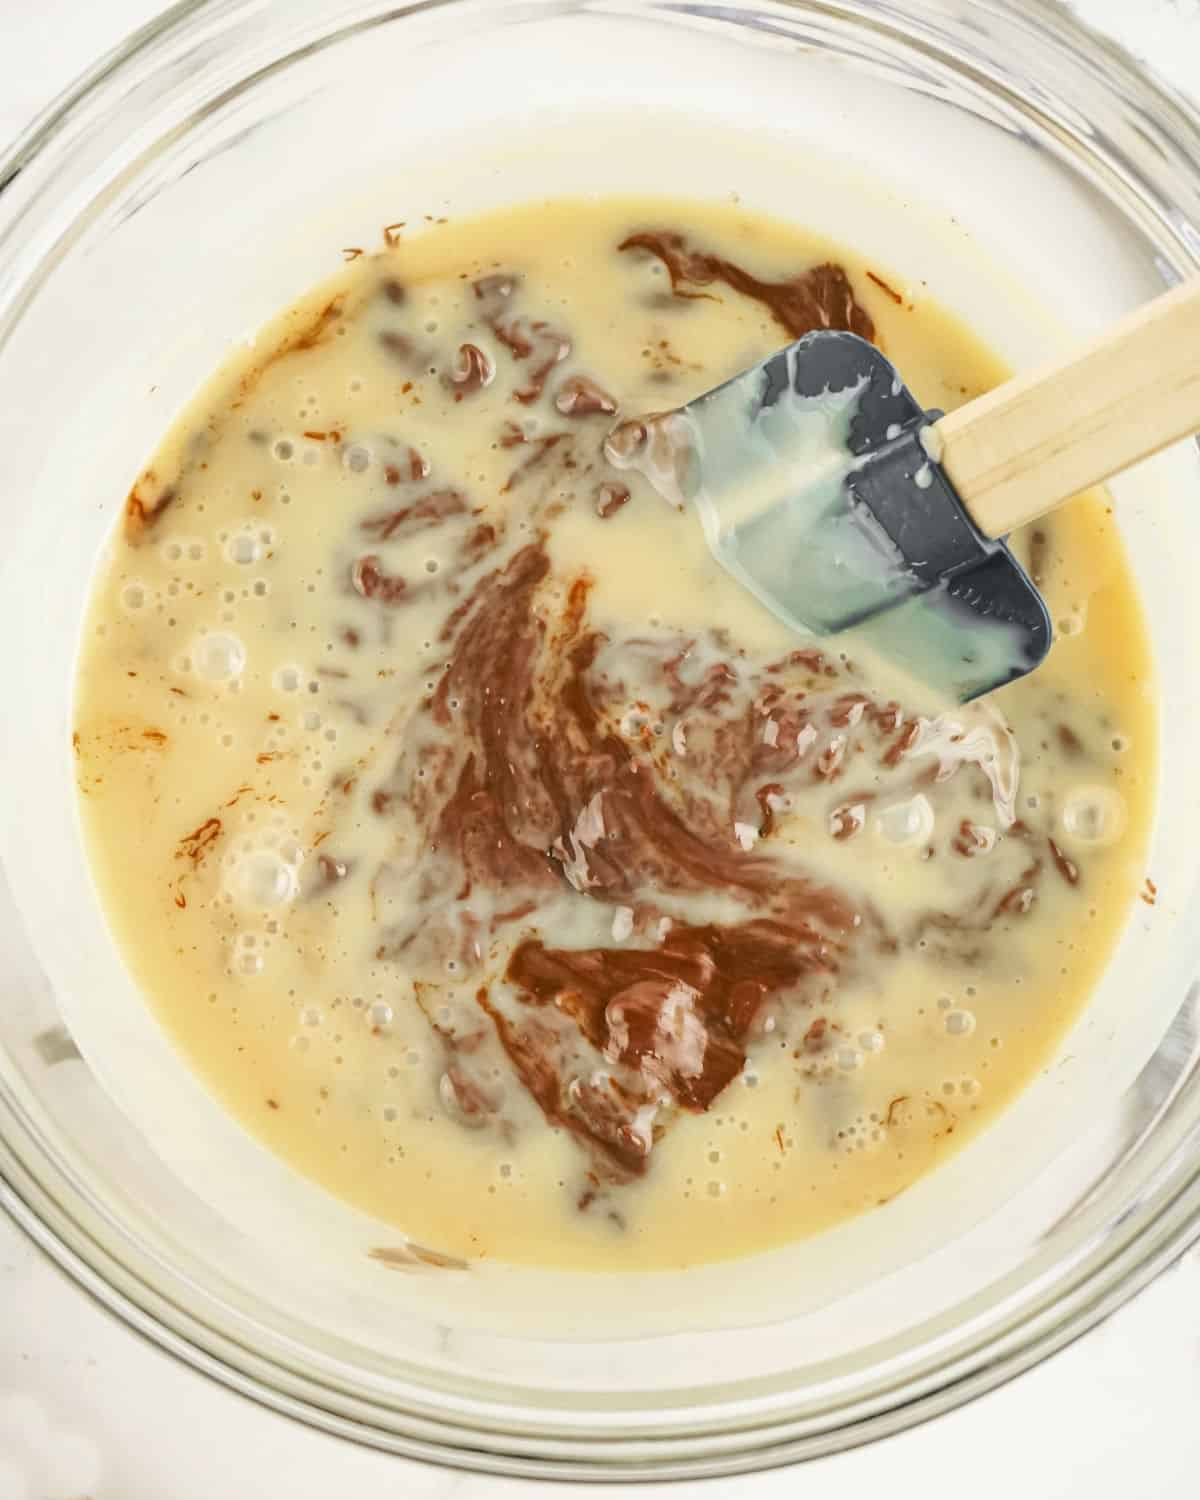 Stirring condensed milk with melted chocolate in a glass bowl with a spatula.